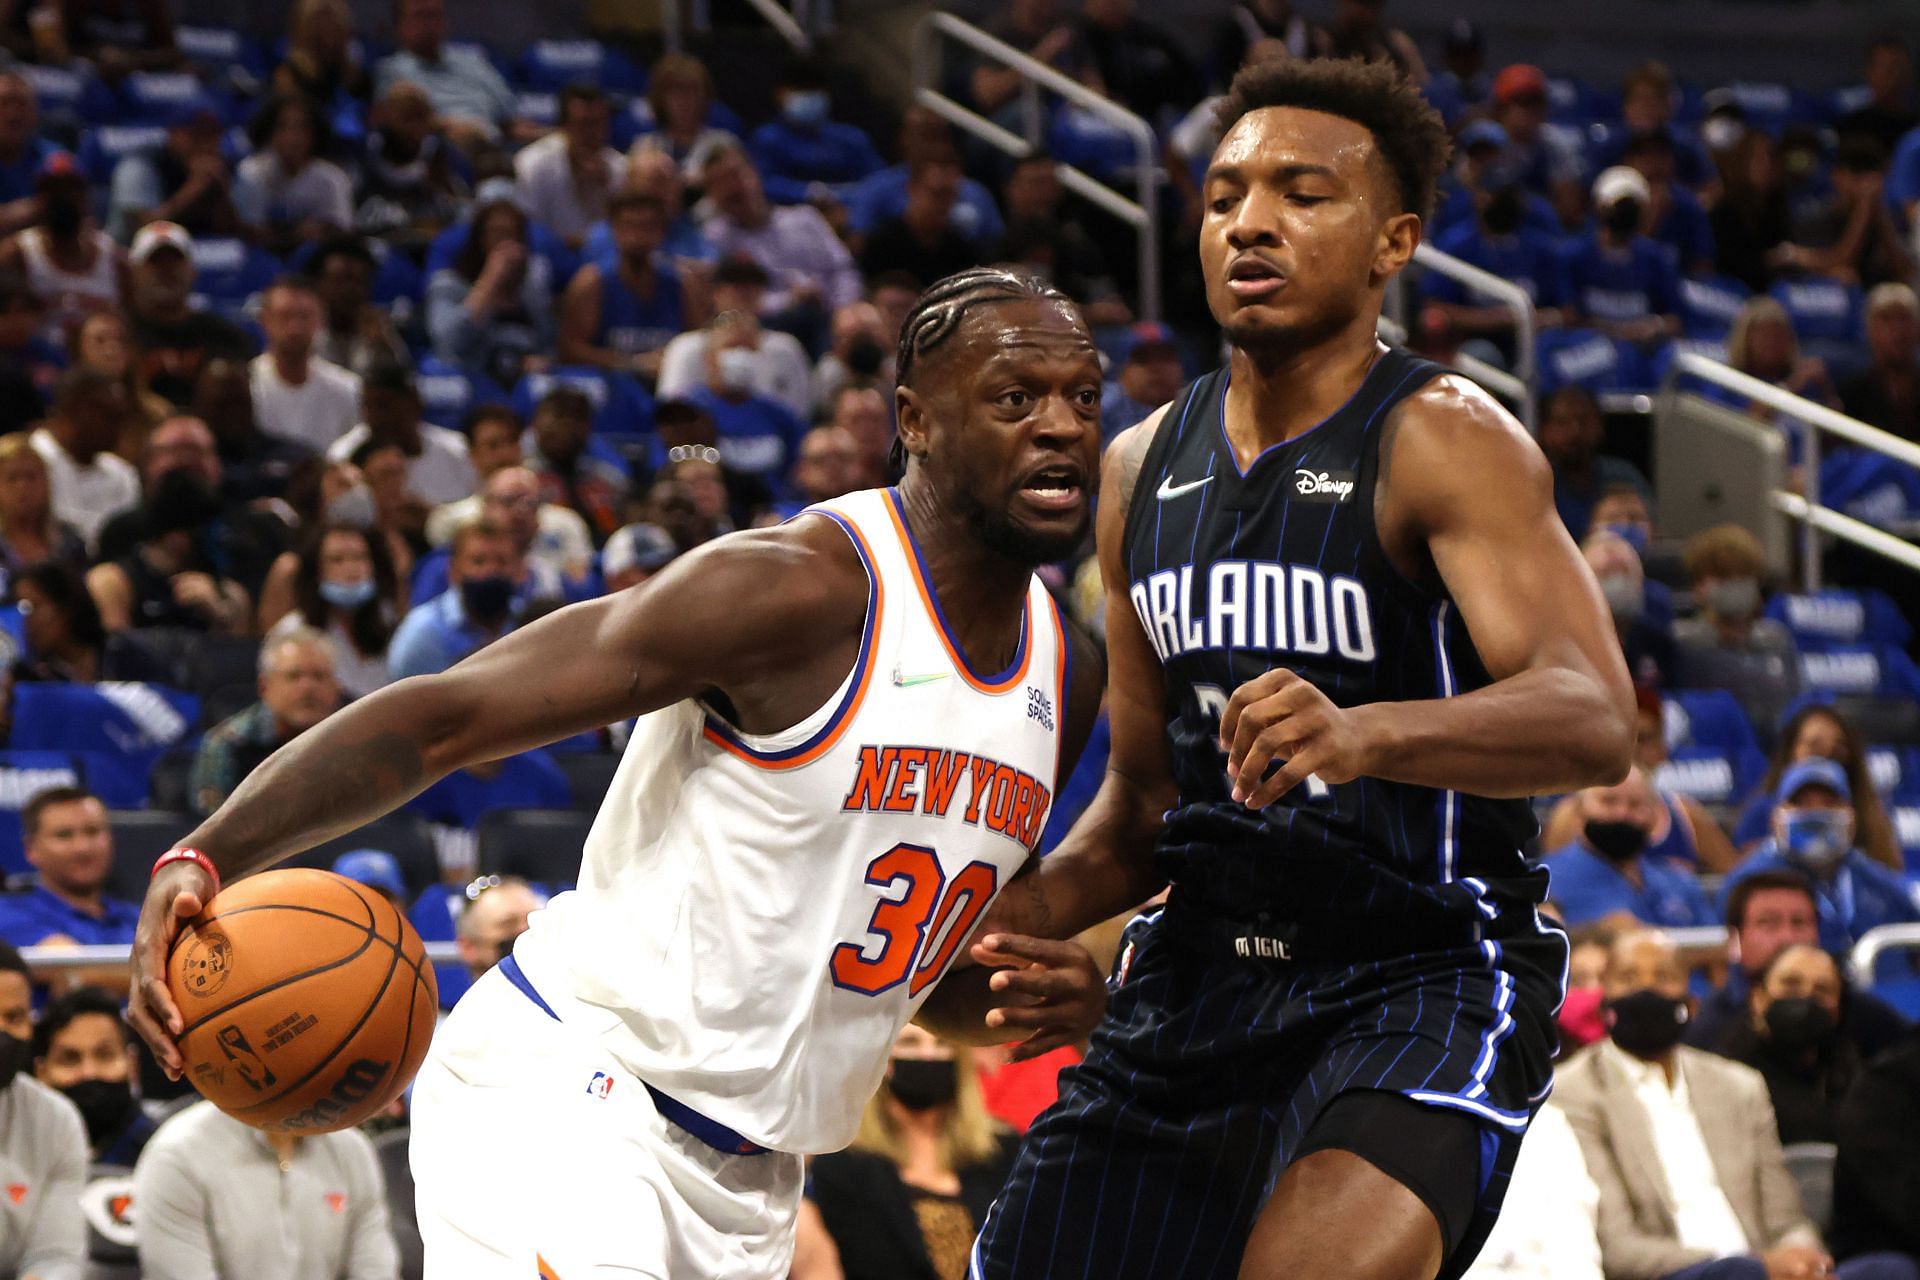 Julius Randle of the New York Knicks drives against Wendell Carter Jr. of the Orlando Magic